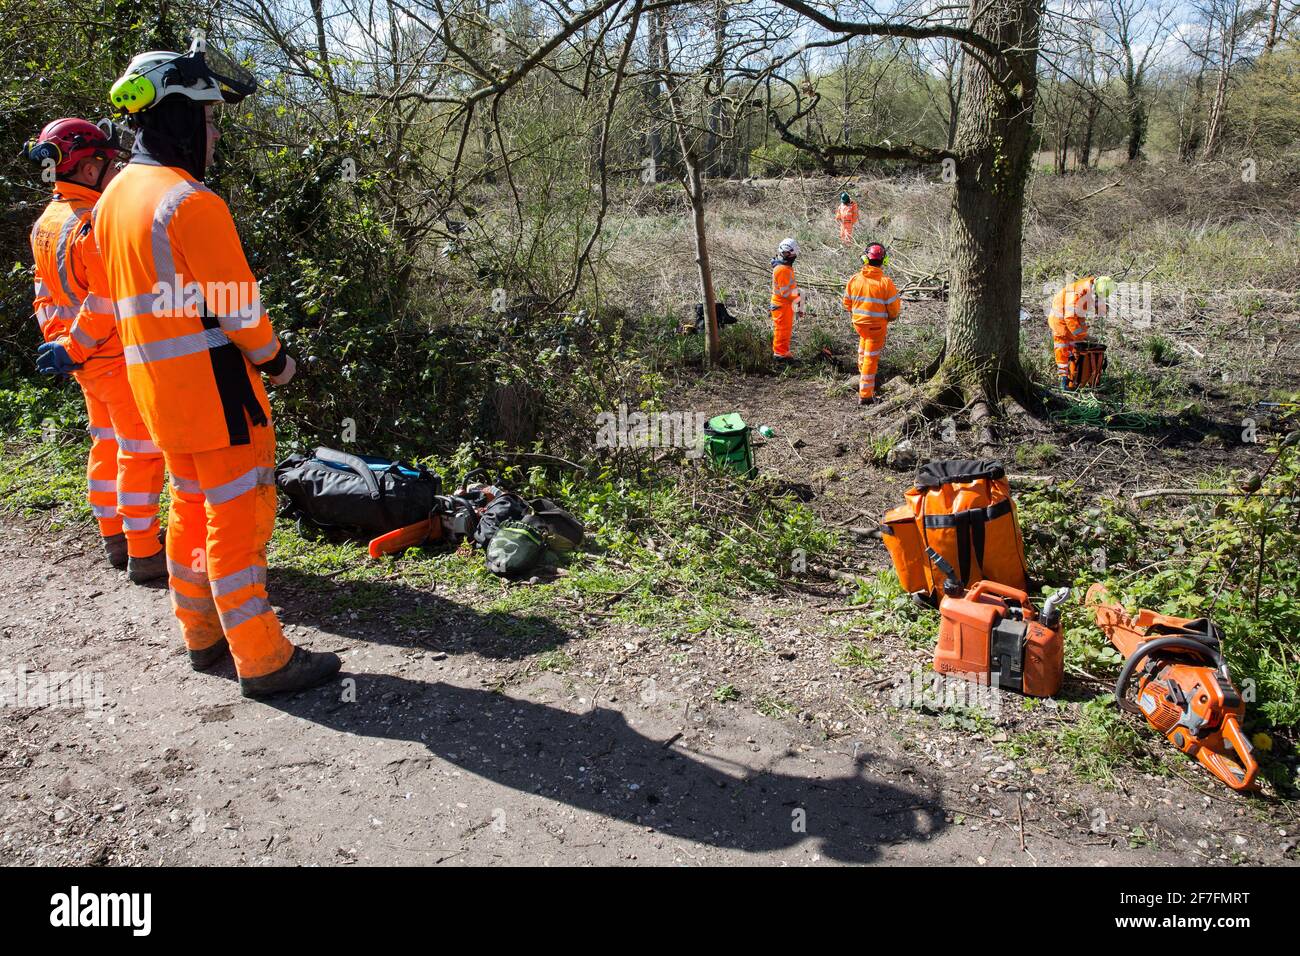 Denham, UK. 6th April, 2021. Tree surgeons observe the felling of trees alongside the Grand Union Canal as part of electricity pylon relocation works in Denham Country Park connected to the HS2 high-speed rail link.Thousands of trees have already been felled in the Colne Valley where HS2 works will include the construction of a Colne Valley Viaduct across lakes and waterways and electricity pylon relocation. Credit: Mark Kerrison/Alamy Live News Stock Photo